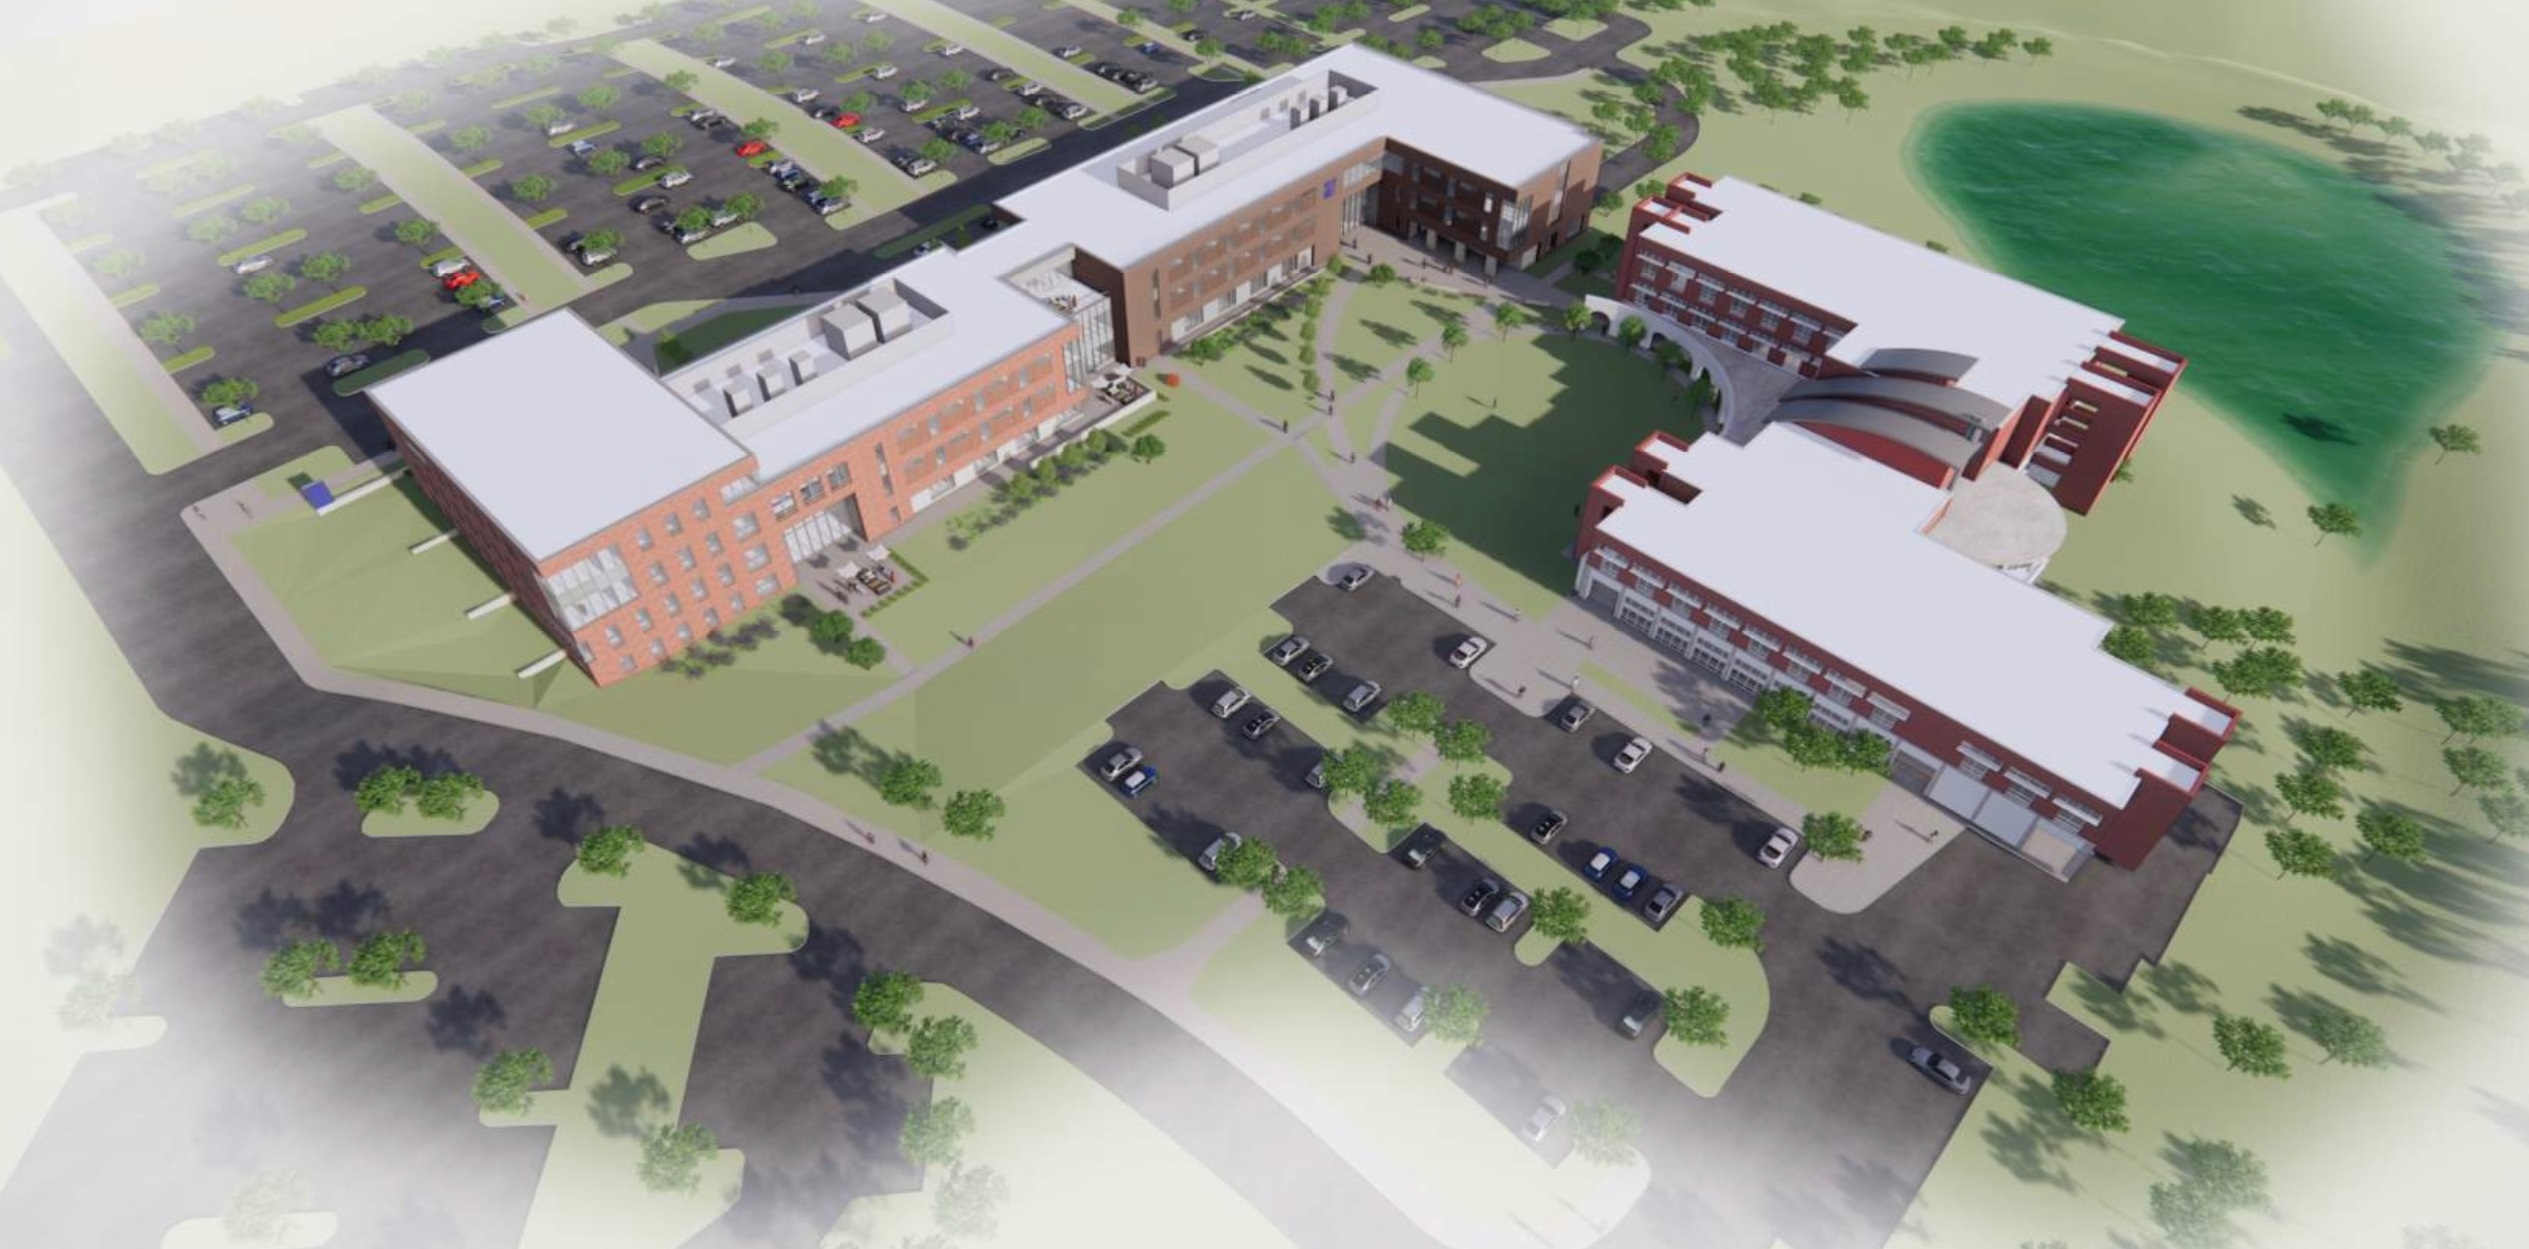 Aerial view of proposed Wildwood campus expansion